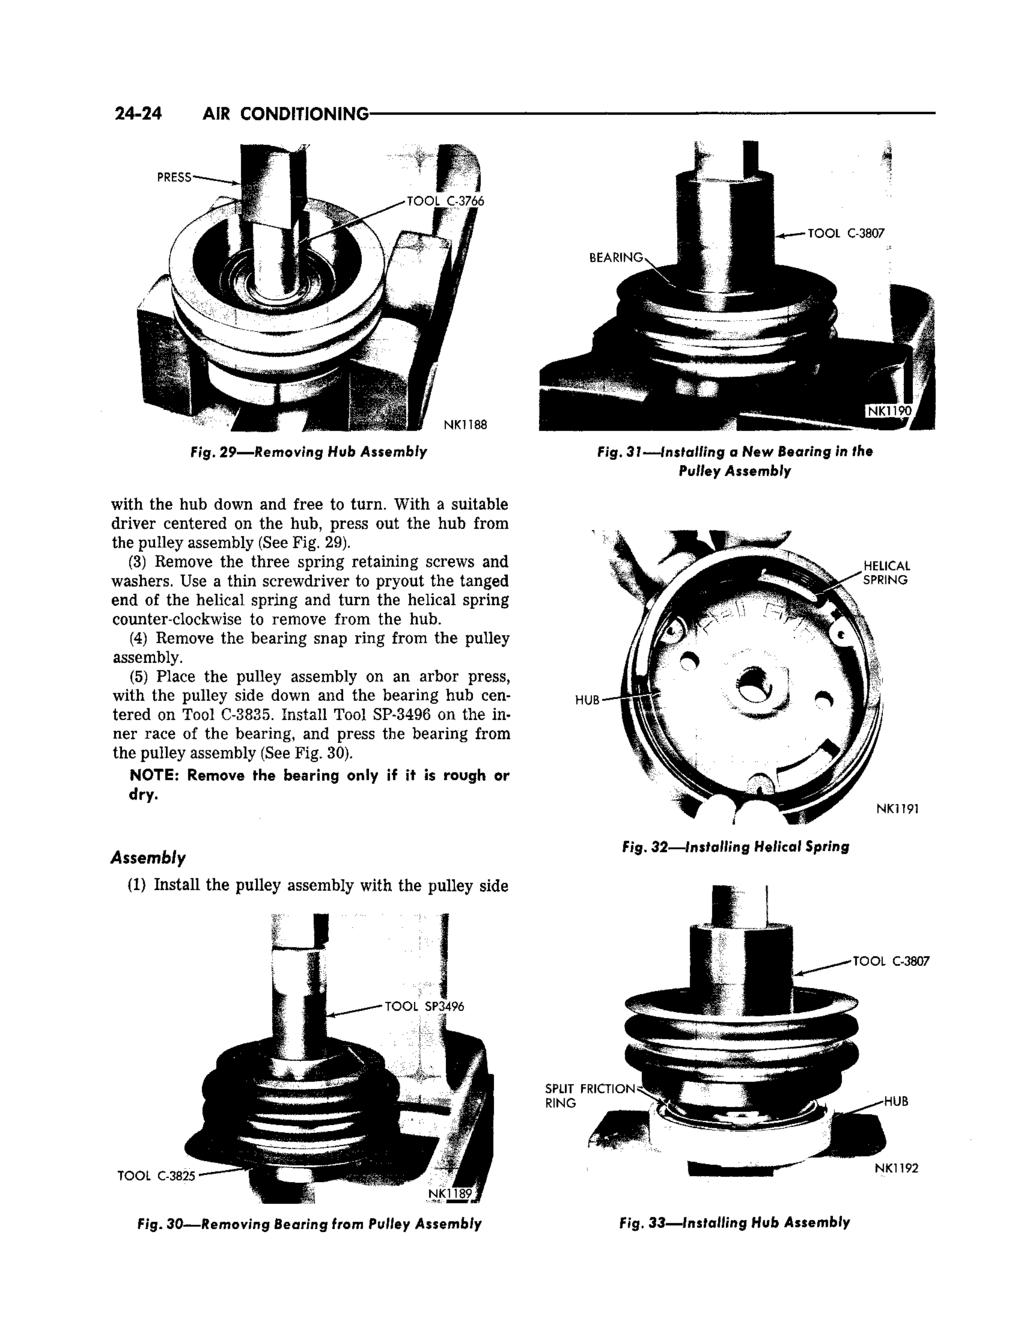 24-24 All CONDITIONING* Fig. 29 Removing Hub Assembly with the hub down and free to turn. With a suitable driver centered on the hub, press out the hub from the pulley assembly (See Fig. 29).